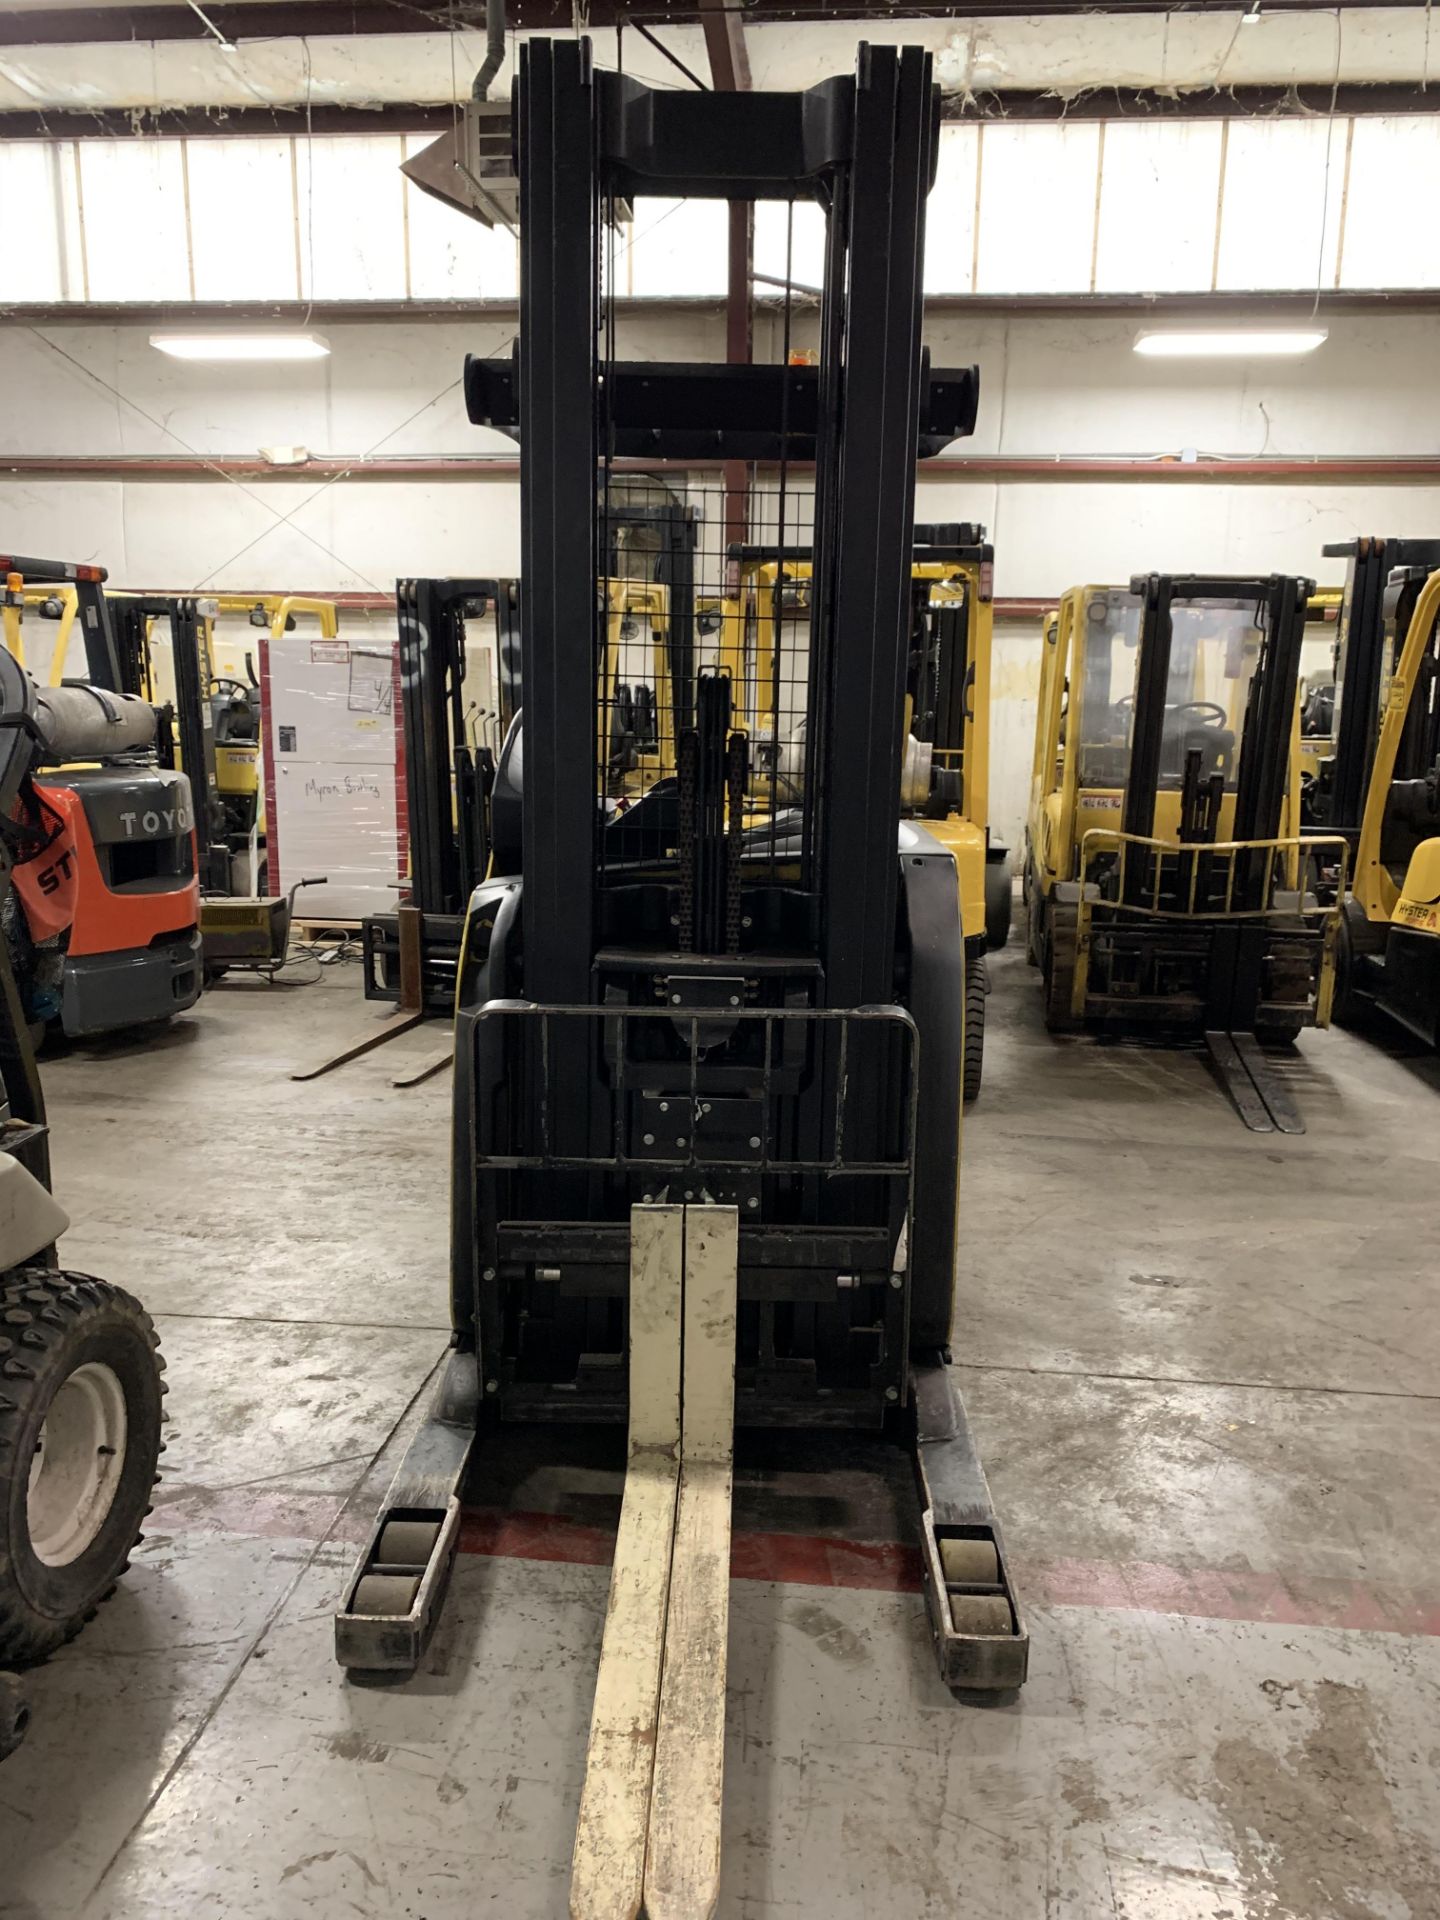 *LOCATED IN OHIO* 2015 HYSTER 3,500-LB. CAPACITY REACH TRUCK, MOD NR35, 111" LOWER/251'' LIFT HEIGHT - Image 2 of 8